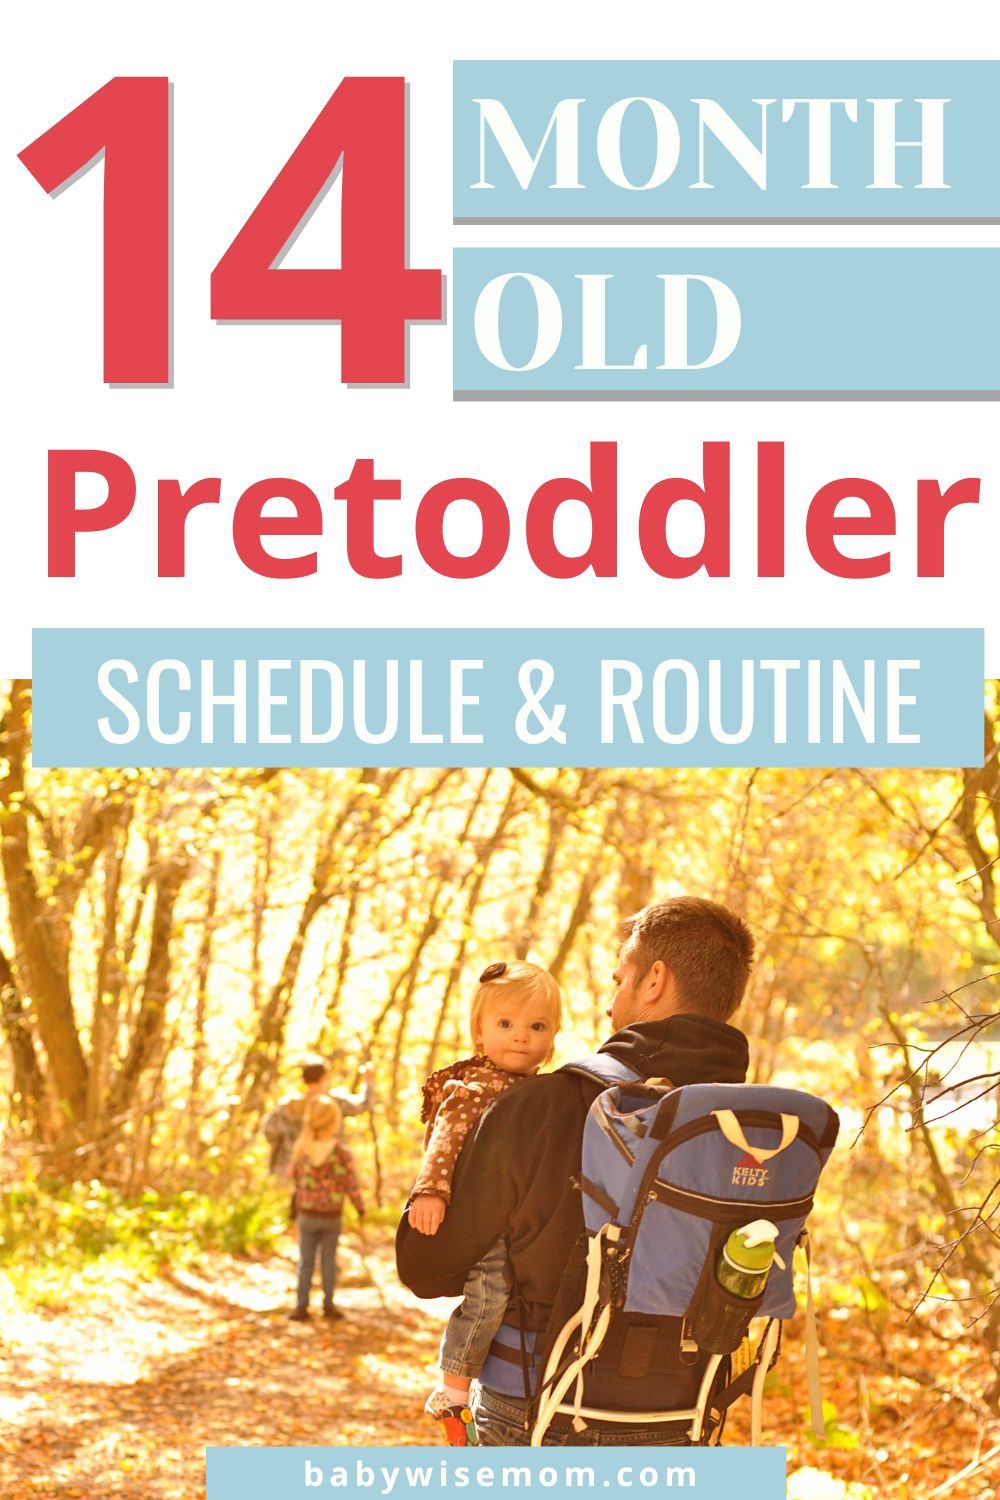 14 month old pretoddler schedule and routine